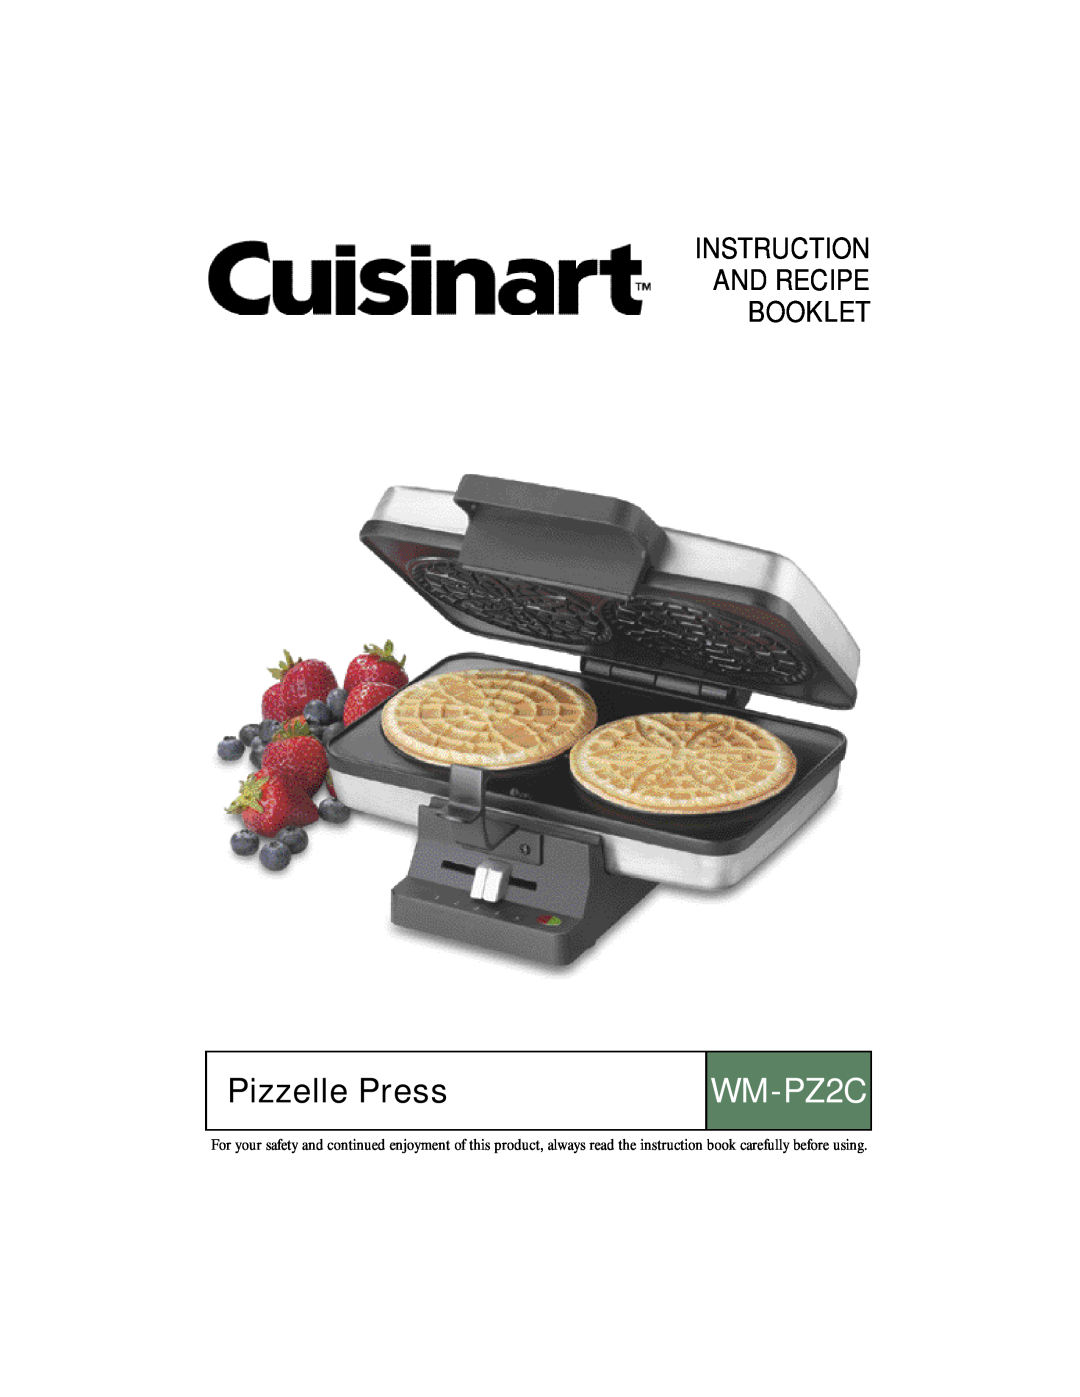 Cuisinart WM-PZ2 manual Pizzelle Press, Instruction And Recipe Booklet, 10ce114763 wmpz2 pizzelle ib.indd 